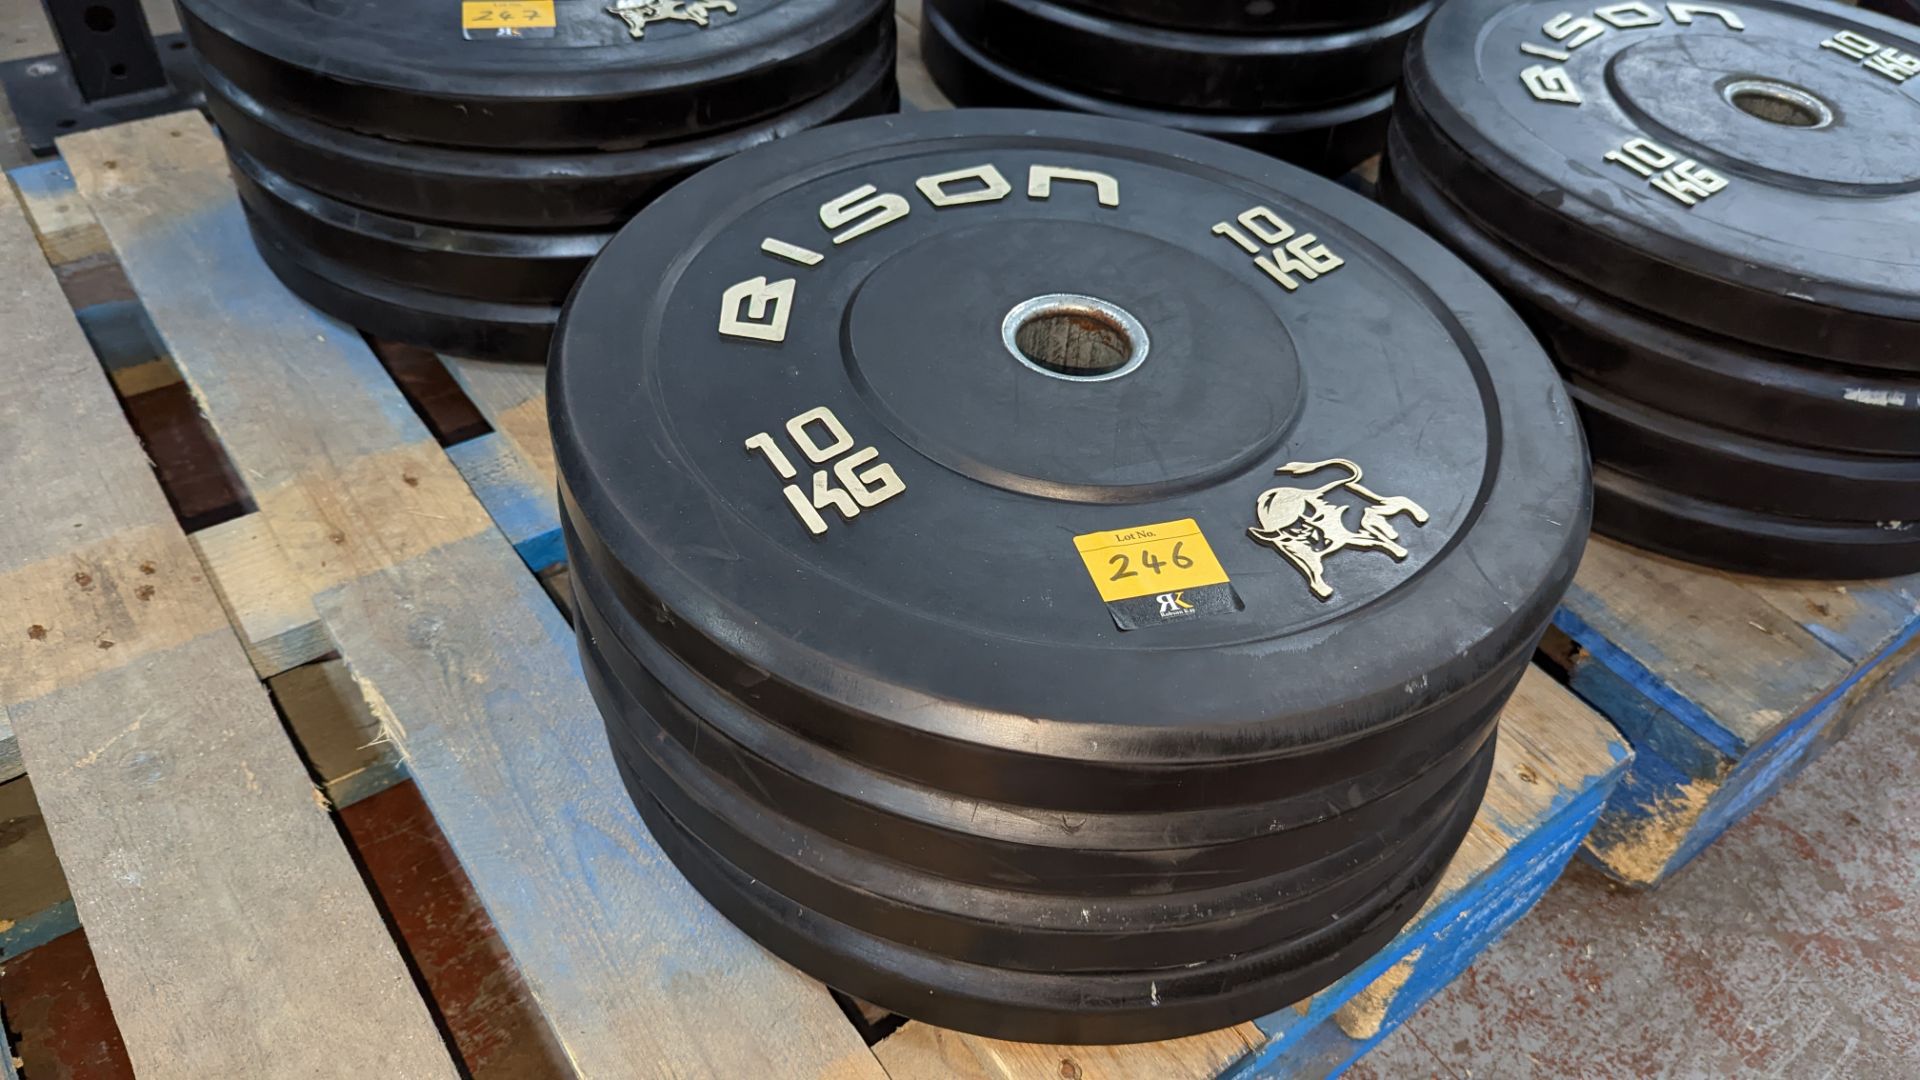 4 off Bison 10kg rubberised Olympic plates